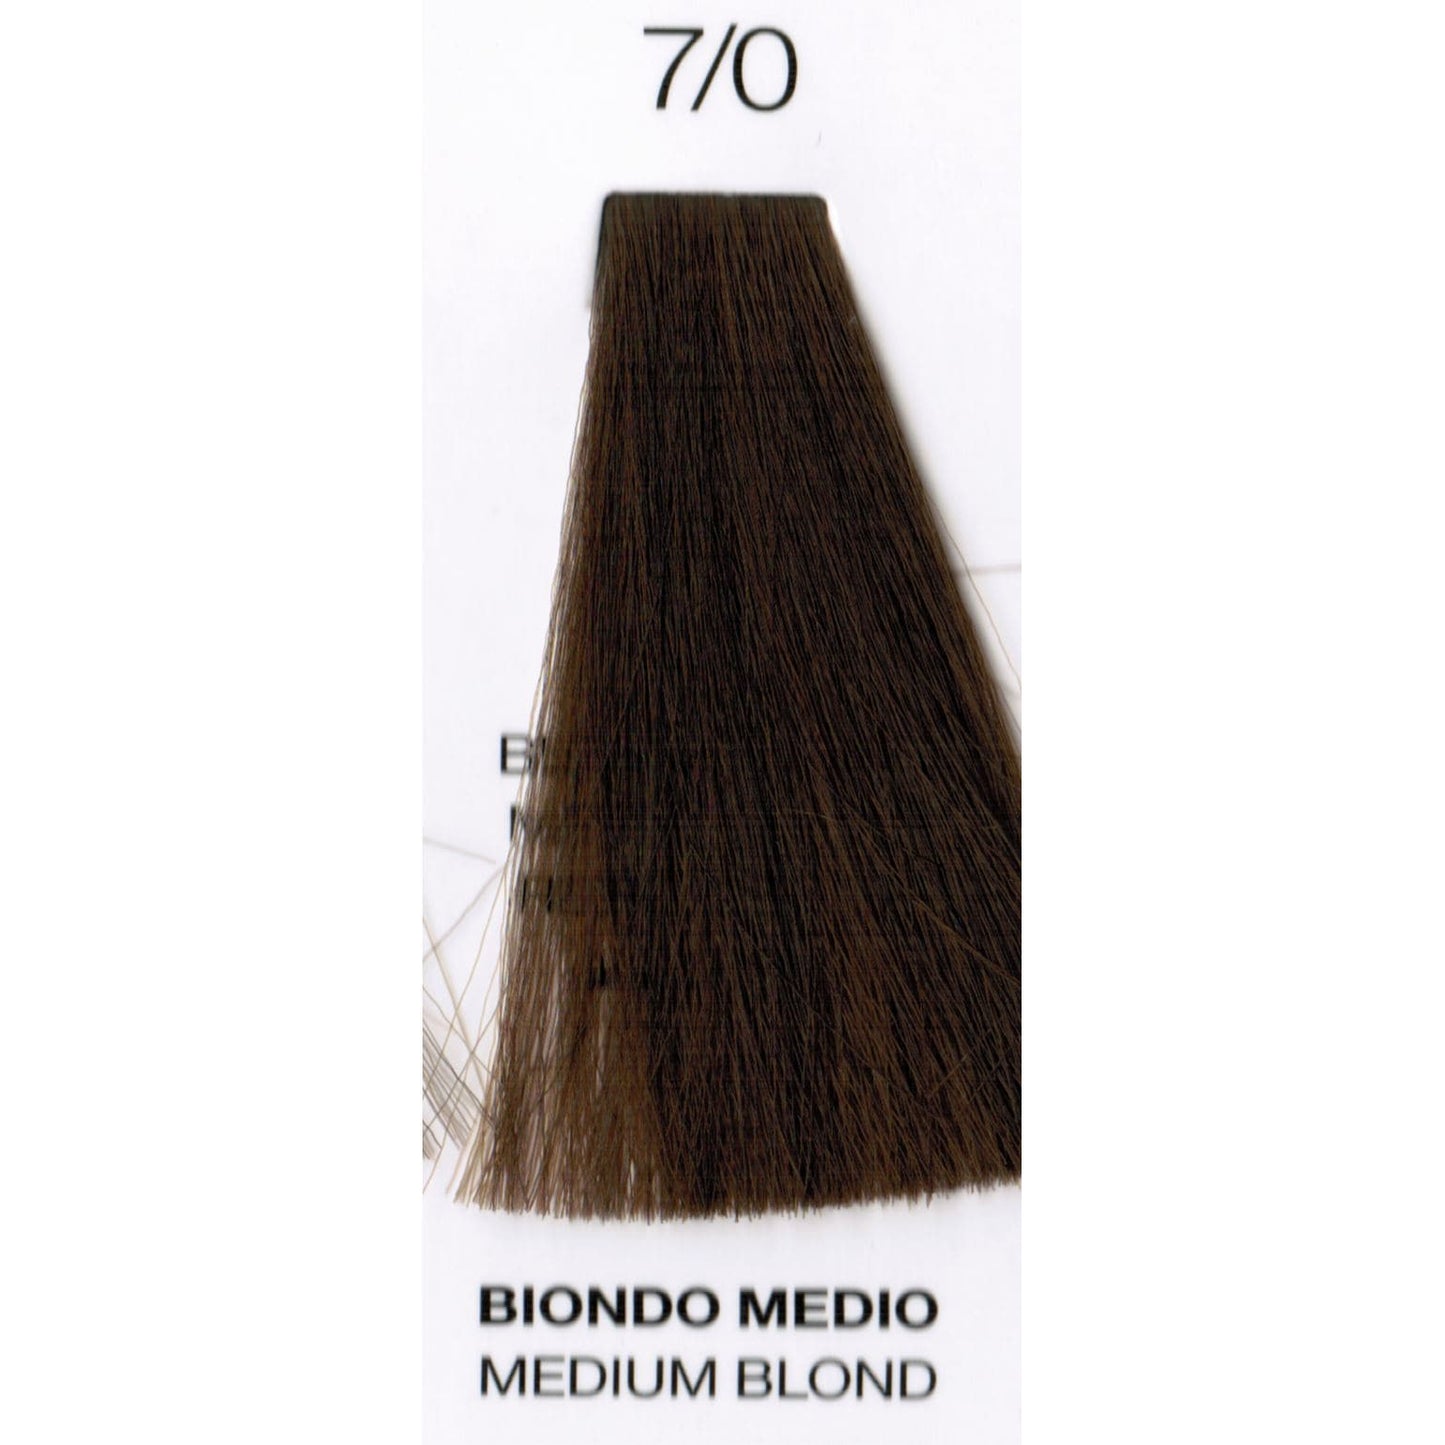 7/0 Medium Blond | Ammonia-Free Permanent Hair Color | Purity | OYSTER - SH Salons